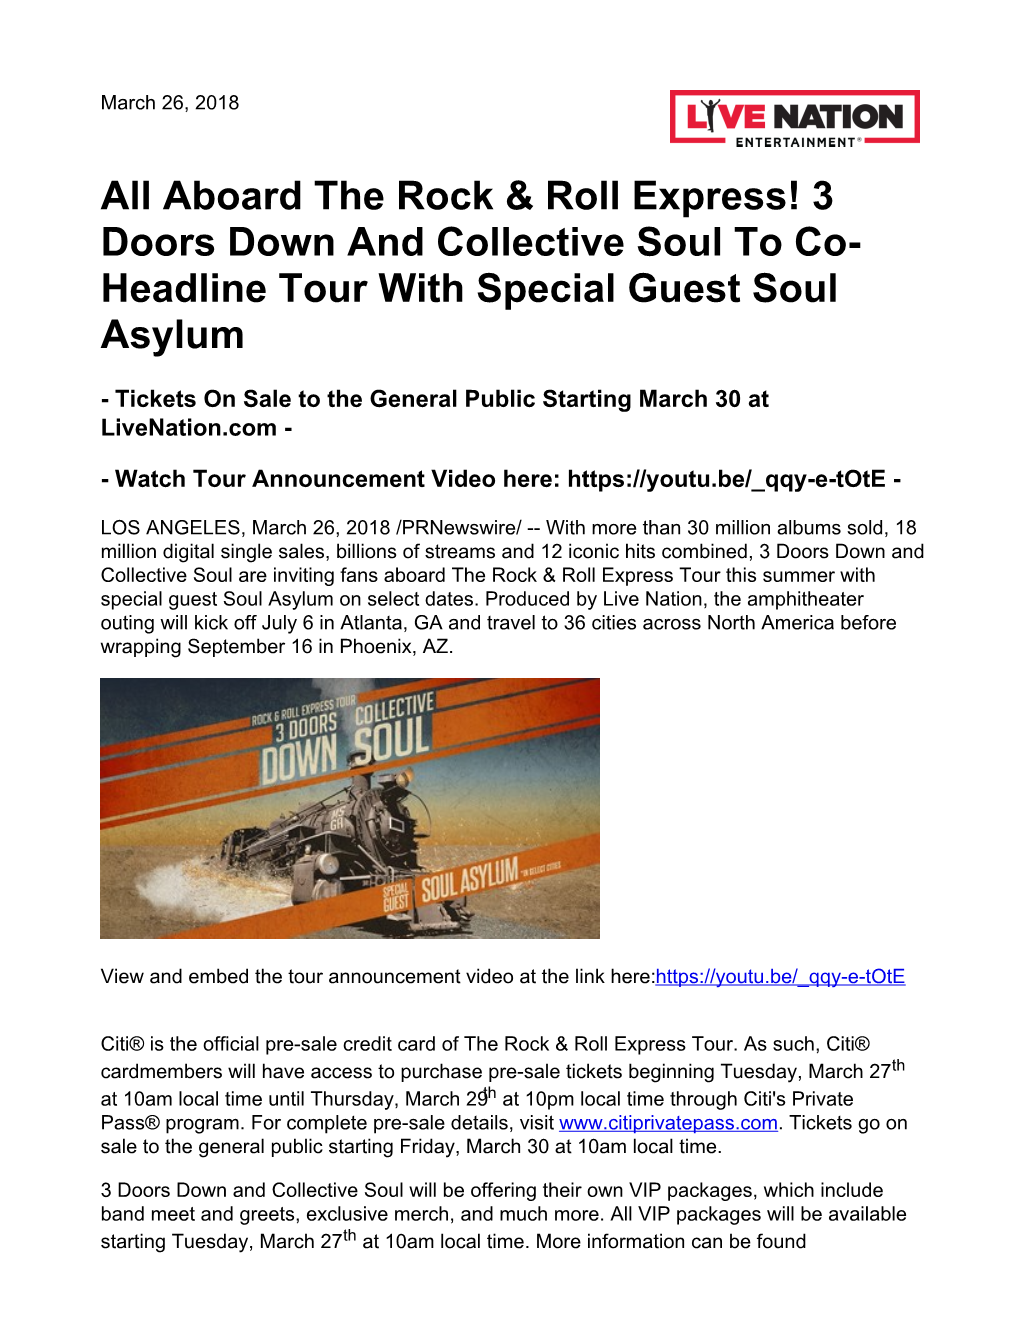 All Aboard the Rock & Roll Express! 3 Doors Down and Collective Soul